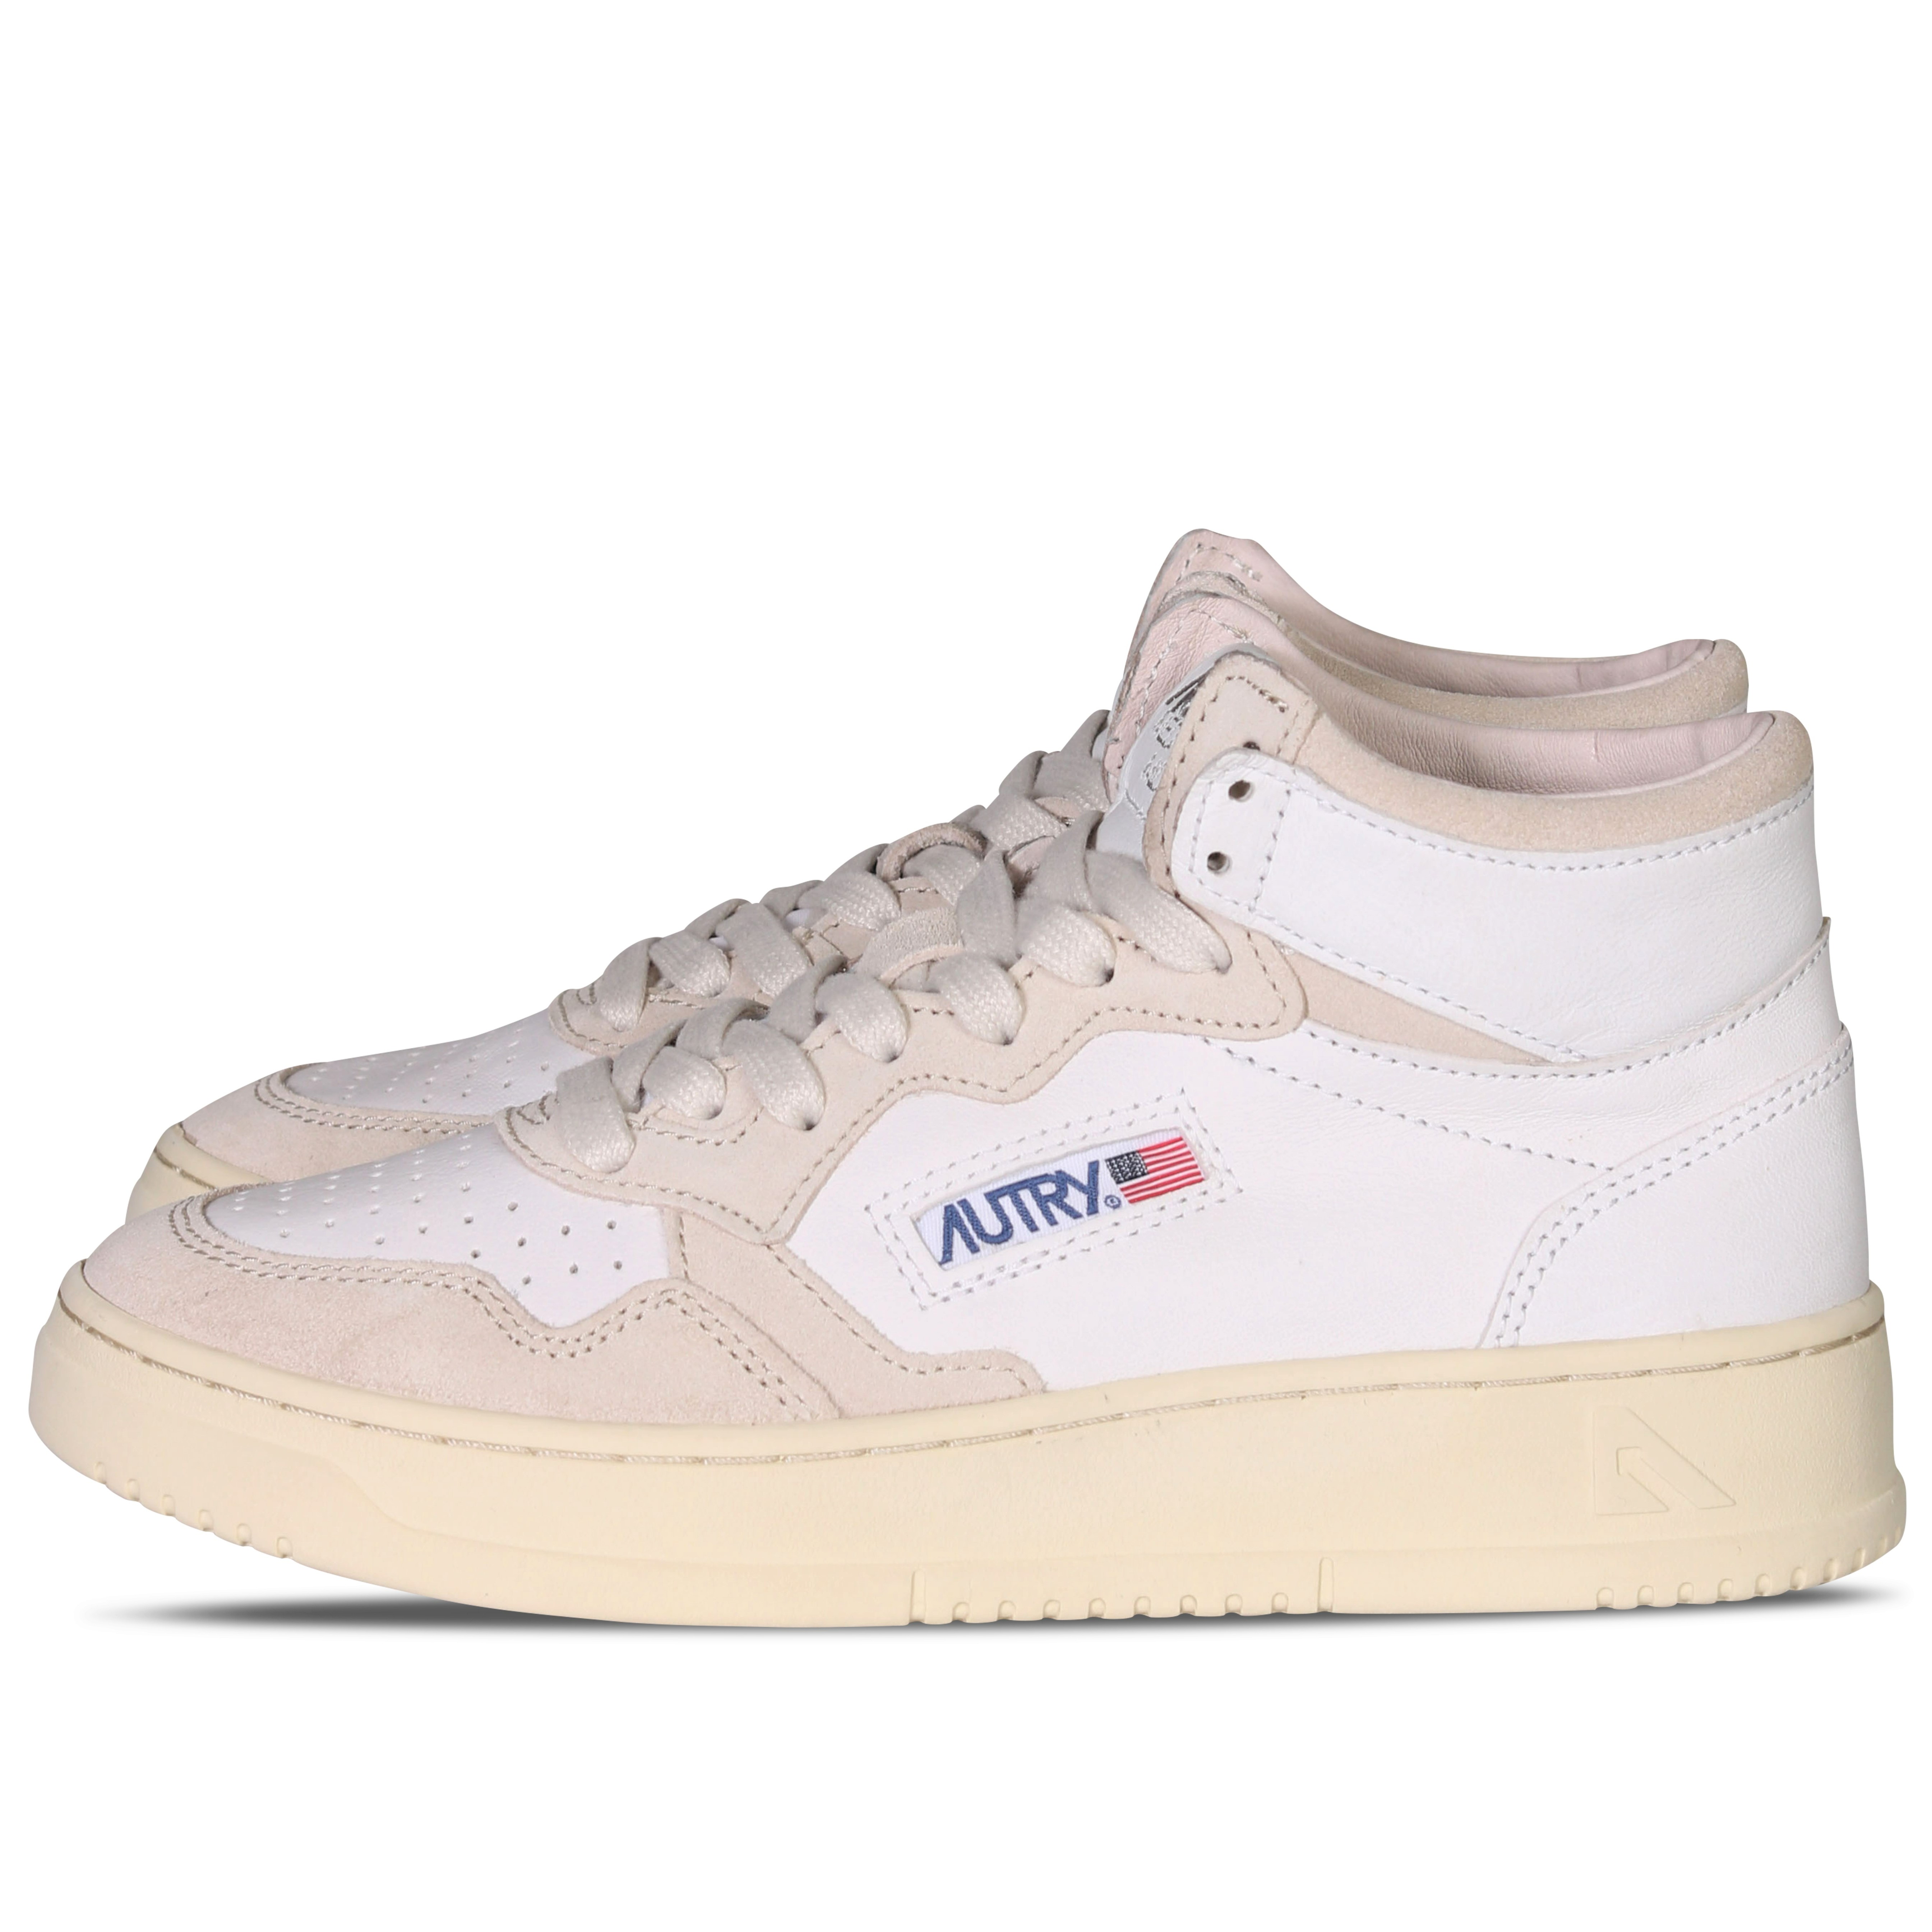 Autry Action Shoes Mid Sneaker Goat/Suede